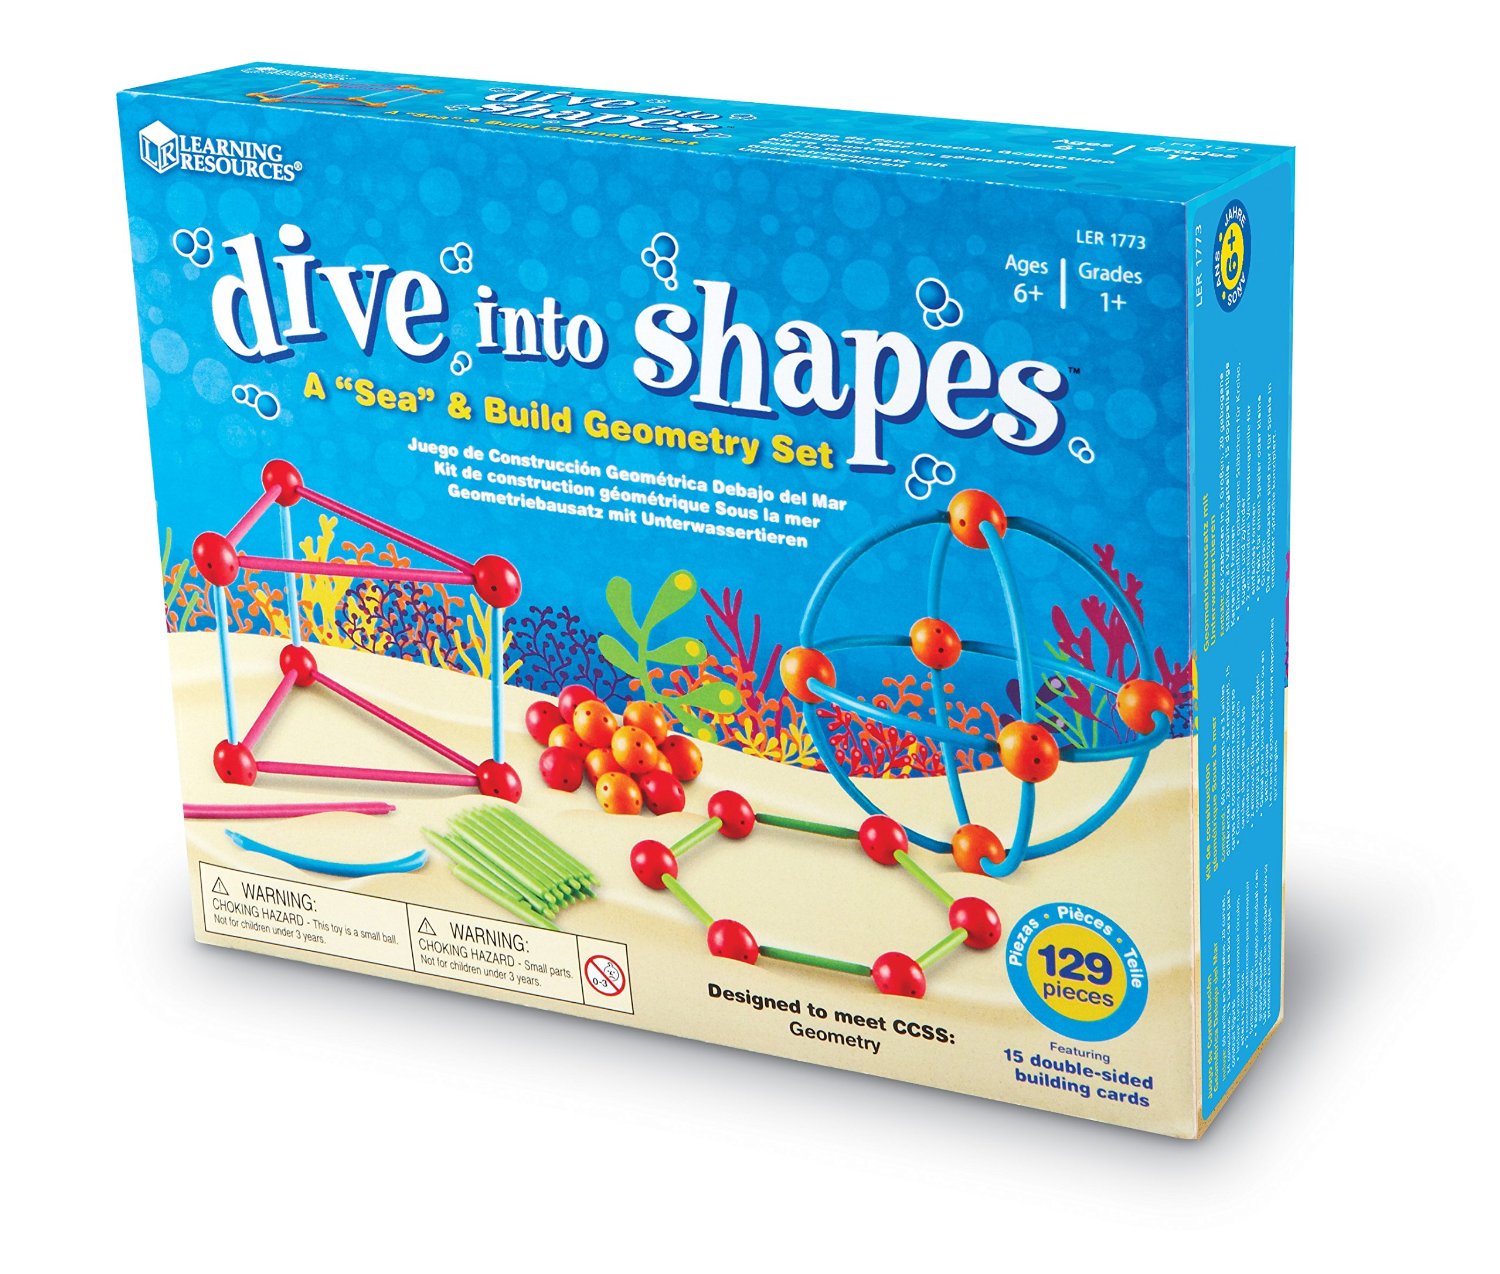 Learning Resources Dive into Shapes $20.99